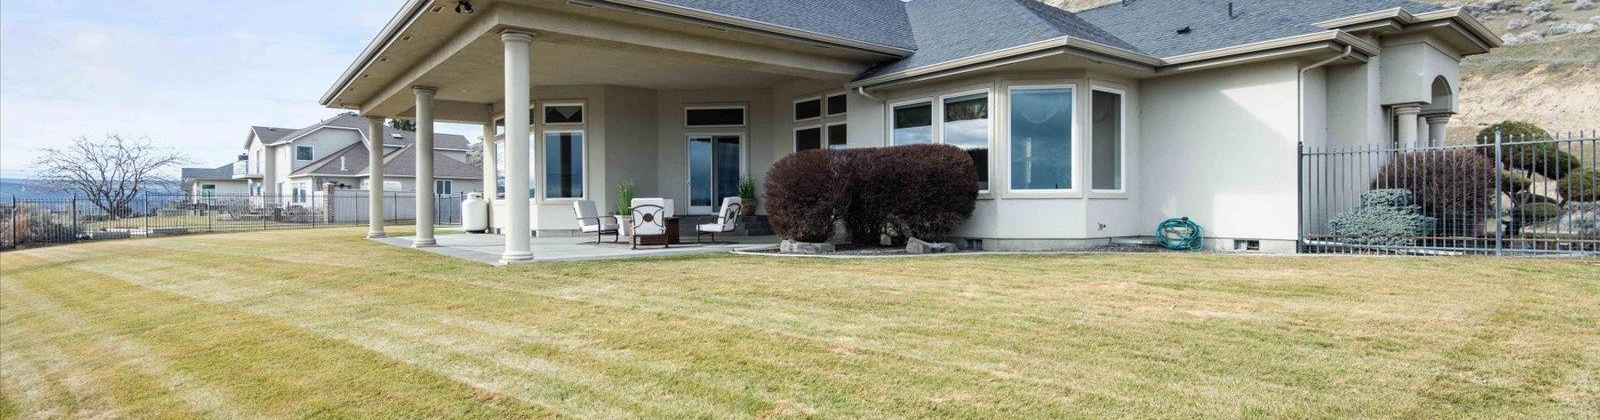 Meadow Hills Drive, Richland, Washington 99352, 3 Bedrooms Bedrooms, ,3 BathroomsBathrooms,Single Family,For Sale,Meadow Hills Drive,273744